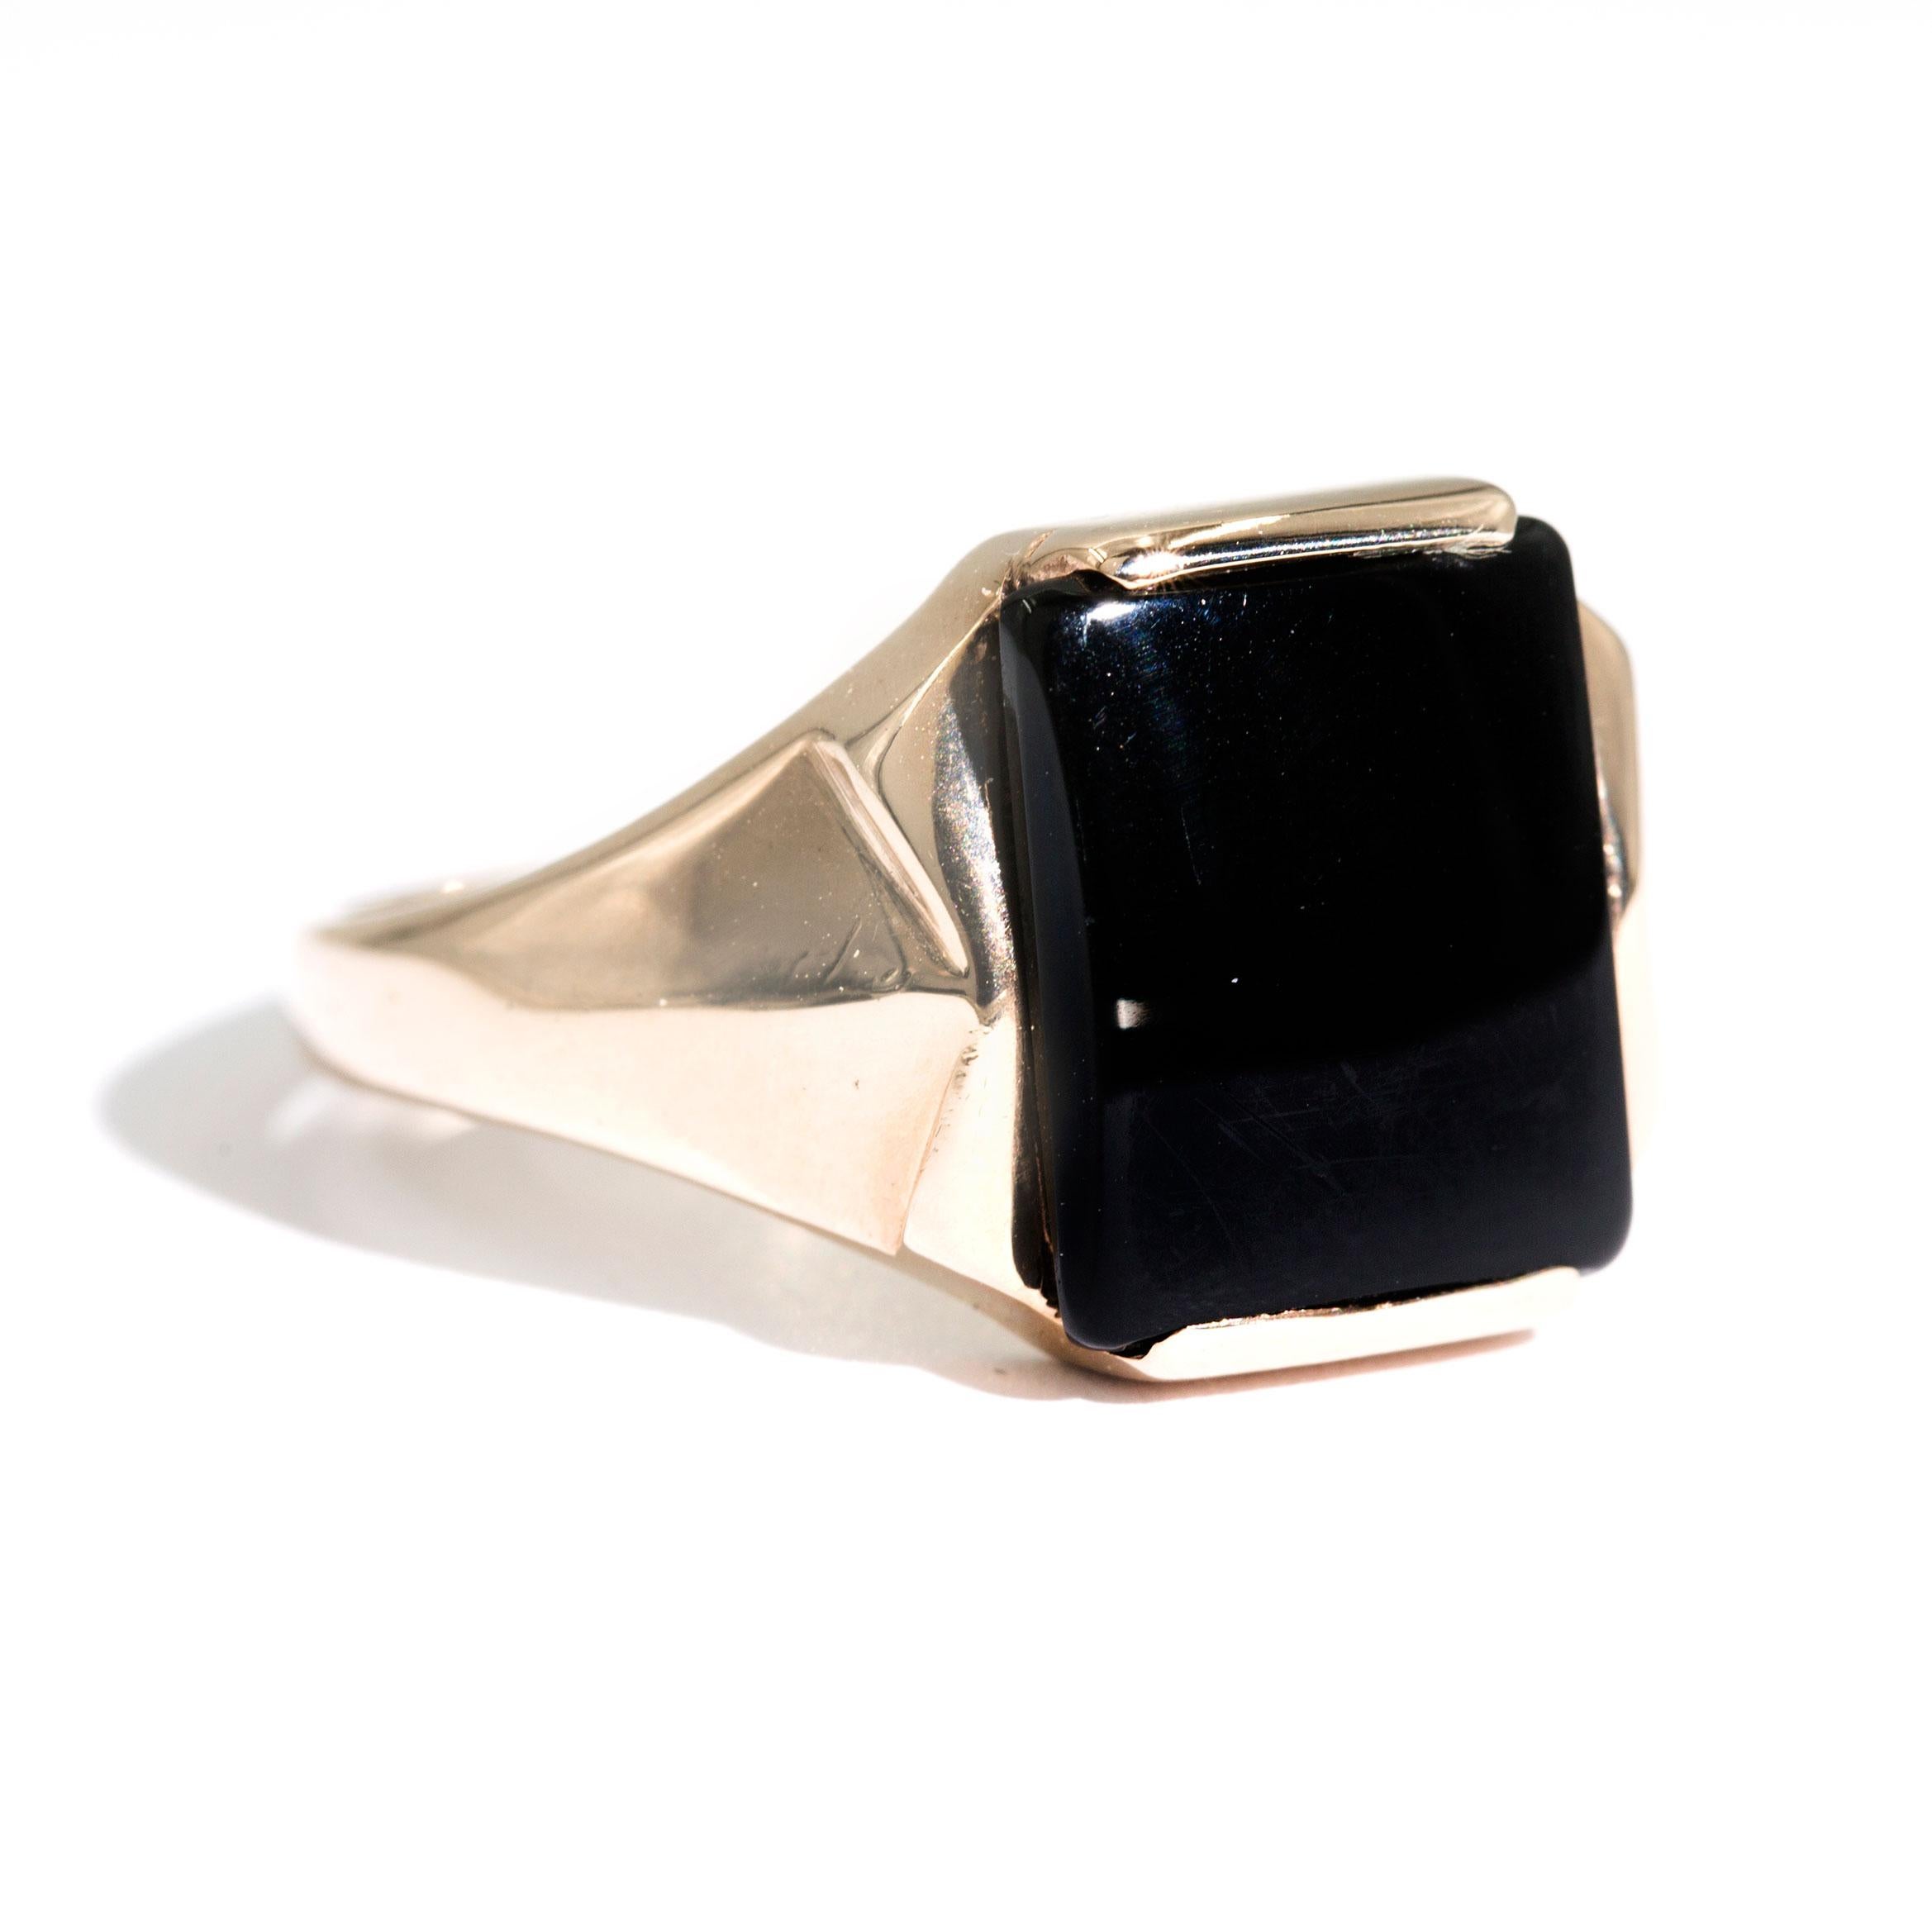 Crafted in 9 carat yellow gold is this handsome vintage mens signet ring featuring a black onyx and seamlessly flows down to pleated sides . We have named this dapper piece The Oscar Ring. The Oscar Ring has a high polished band, and the unique